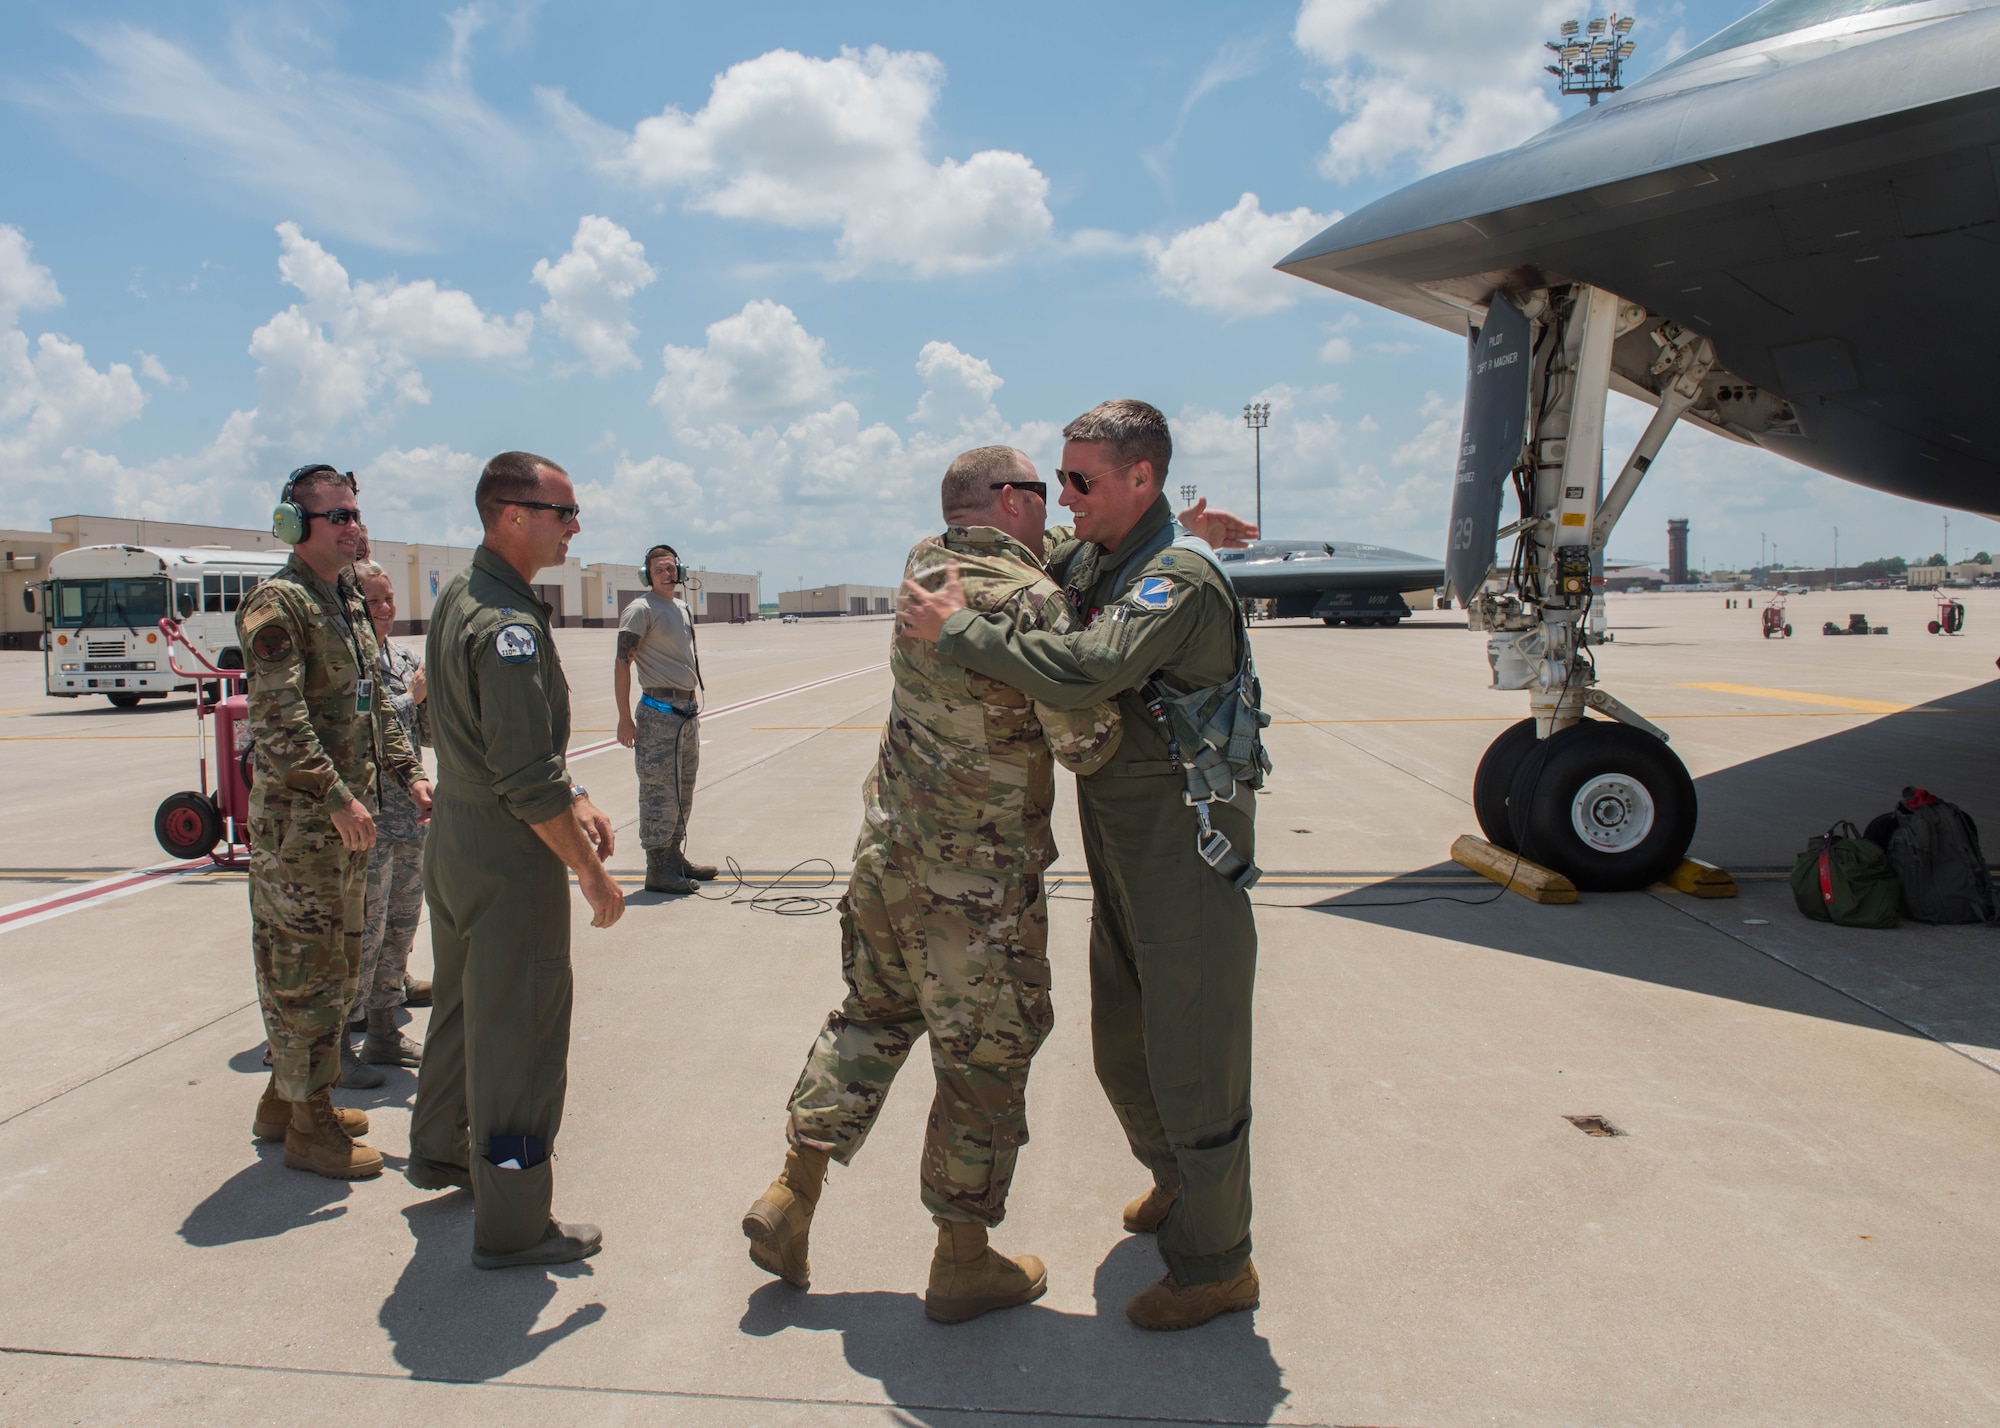 Airmen greet Lt. Col. Timothy B. Rezac, commander of the 110th Bomb Squadron, on July 2, 2019, at Whiteman Air Force Base, Missouri. Rezac became the 14th ever B-2 Spirit pilot to reach 1500 flight hours in the stealth bomber. (U.S. Air Force photo by Senior Airman Ashley Adkins)